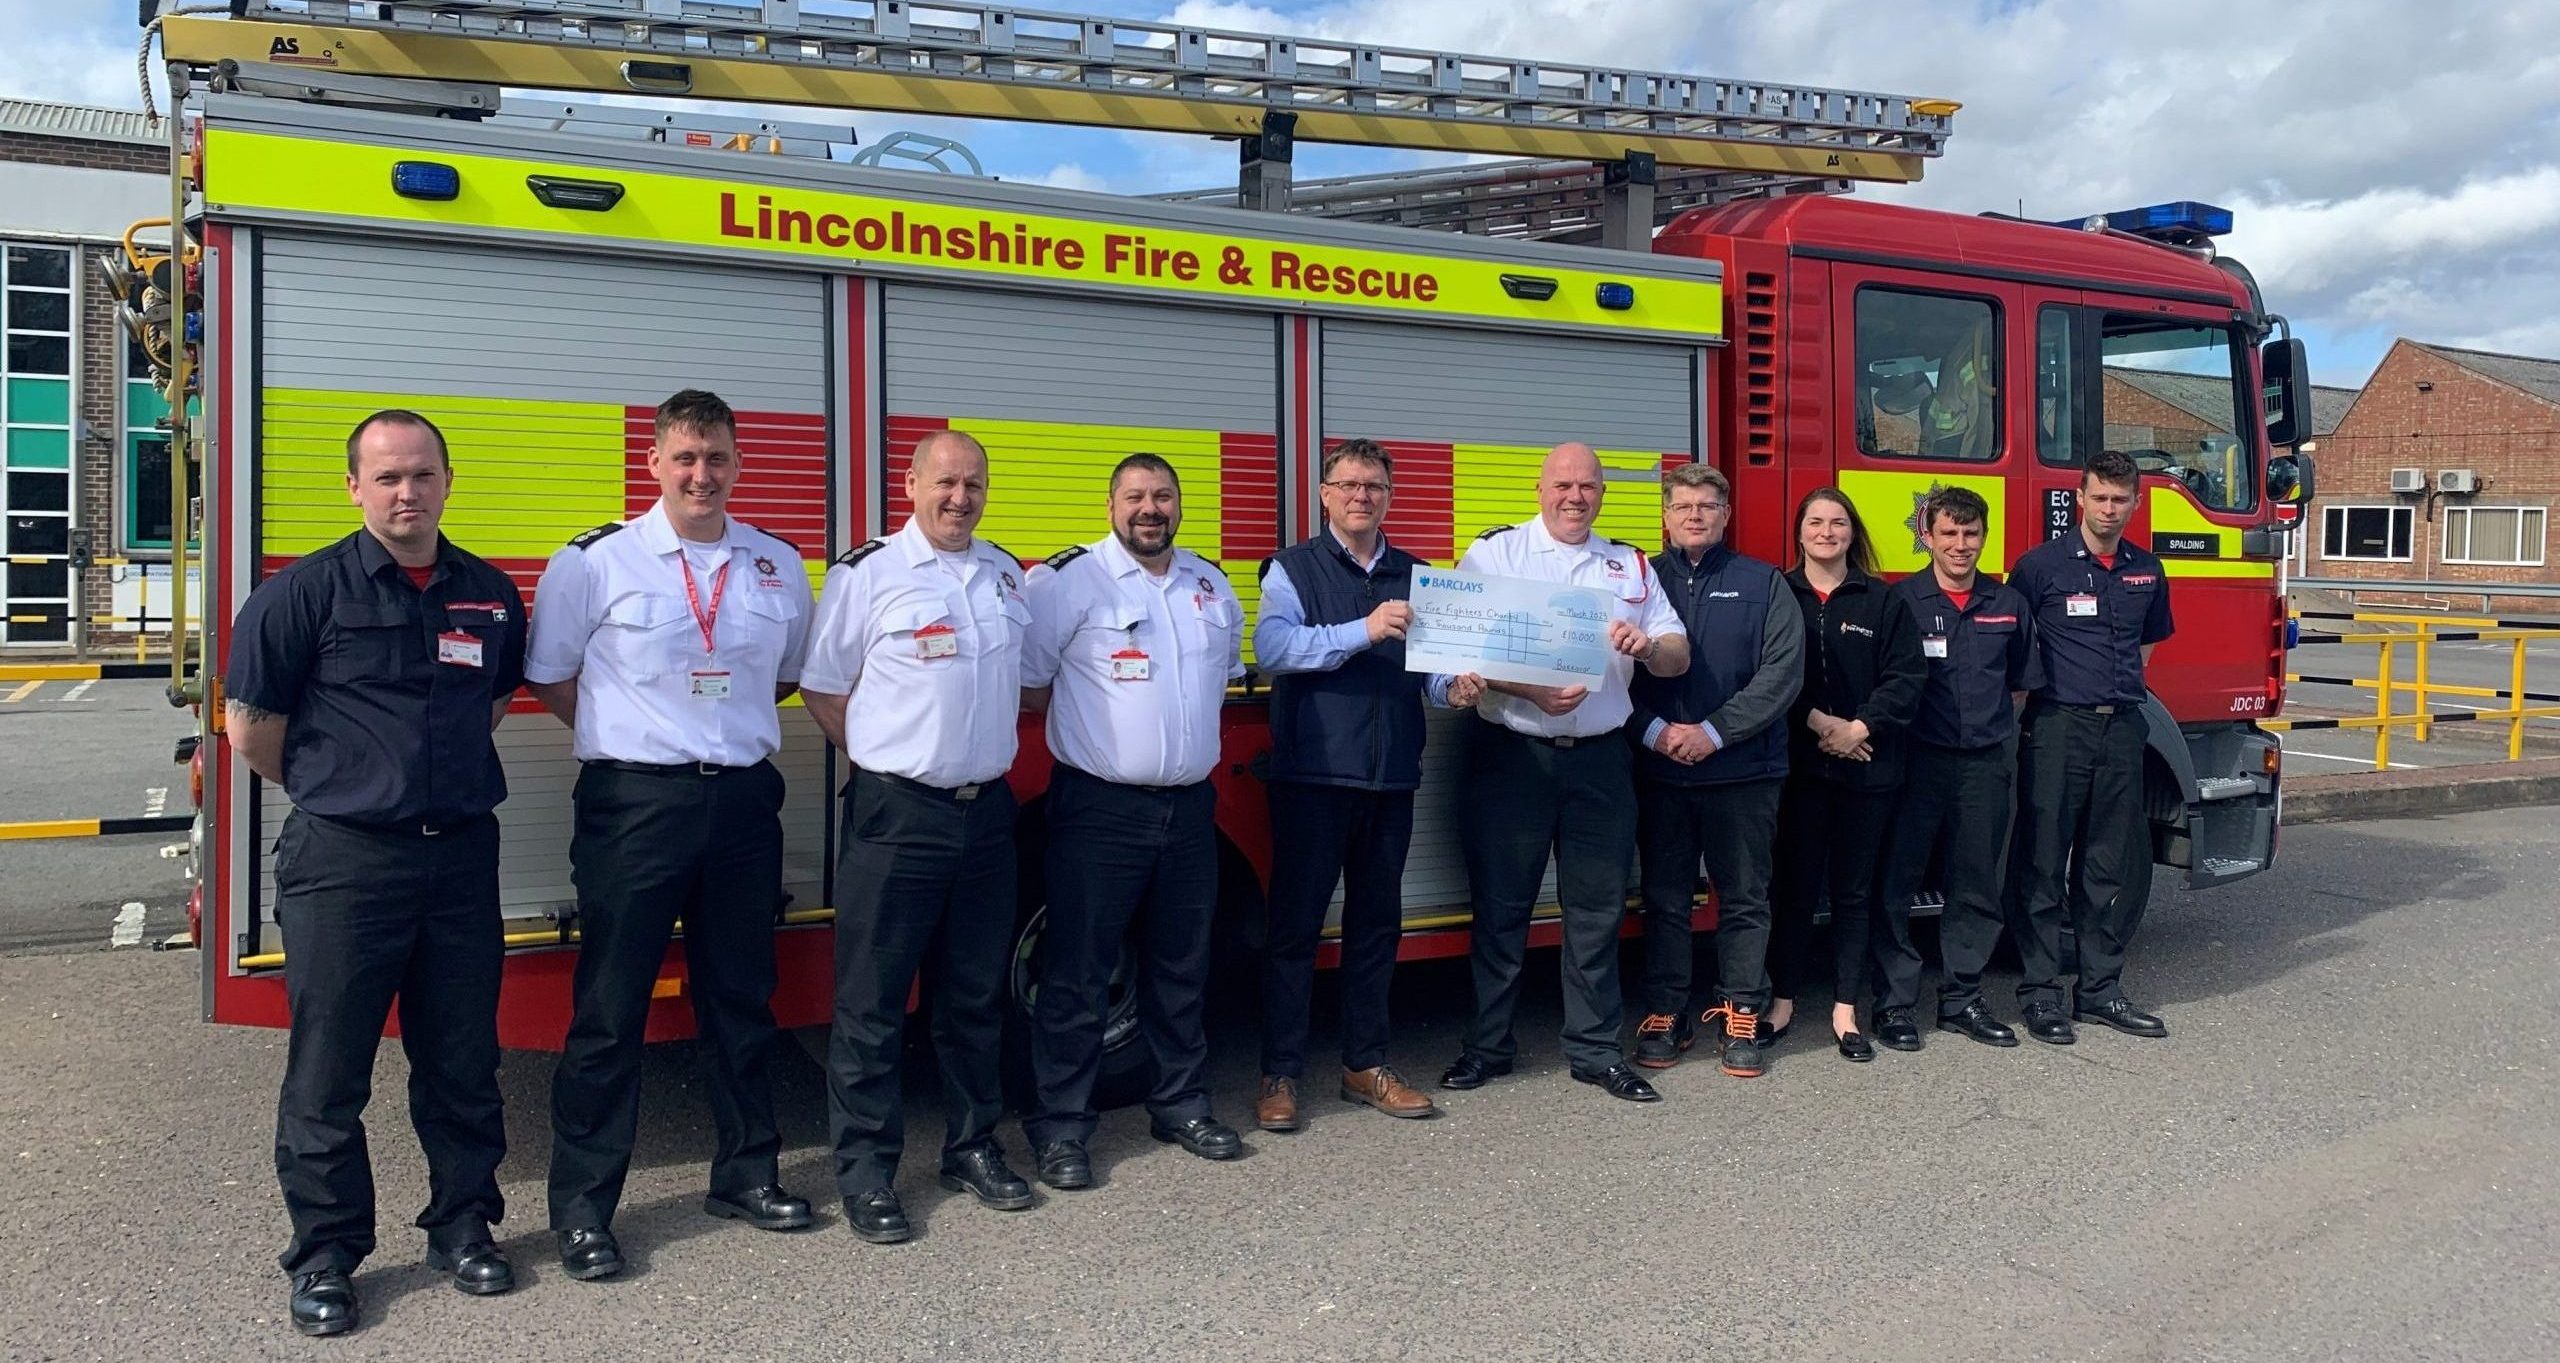 Local business donates £10,000 as thank you for flooding support